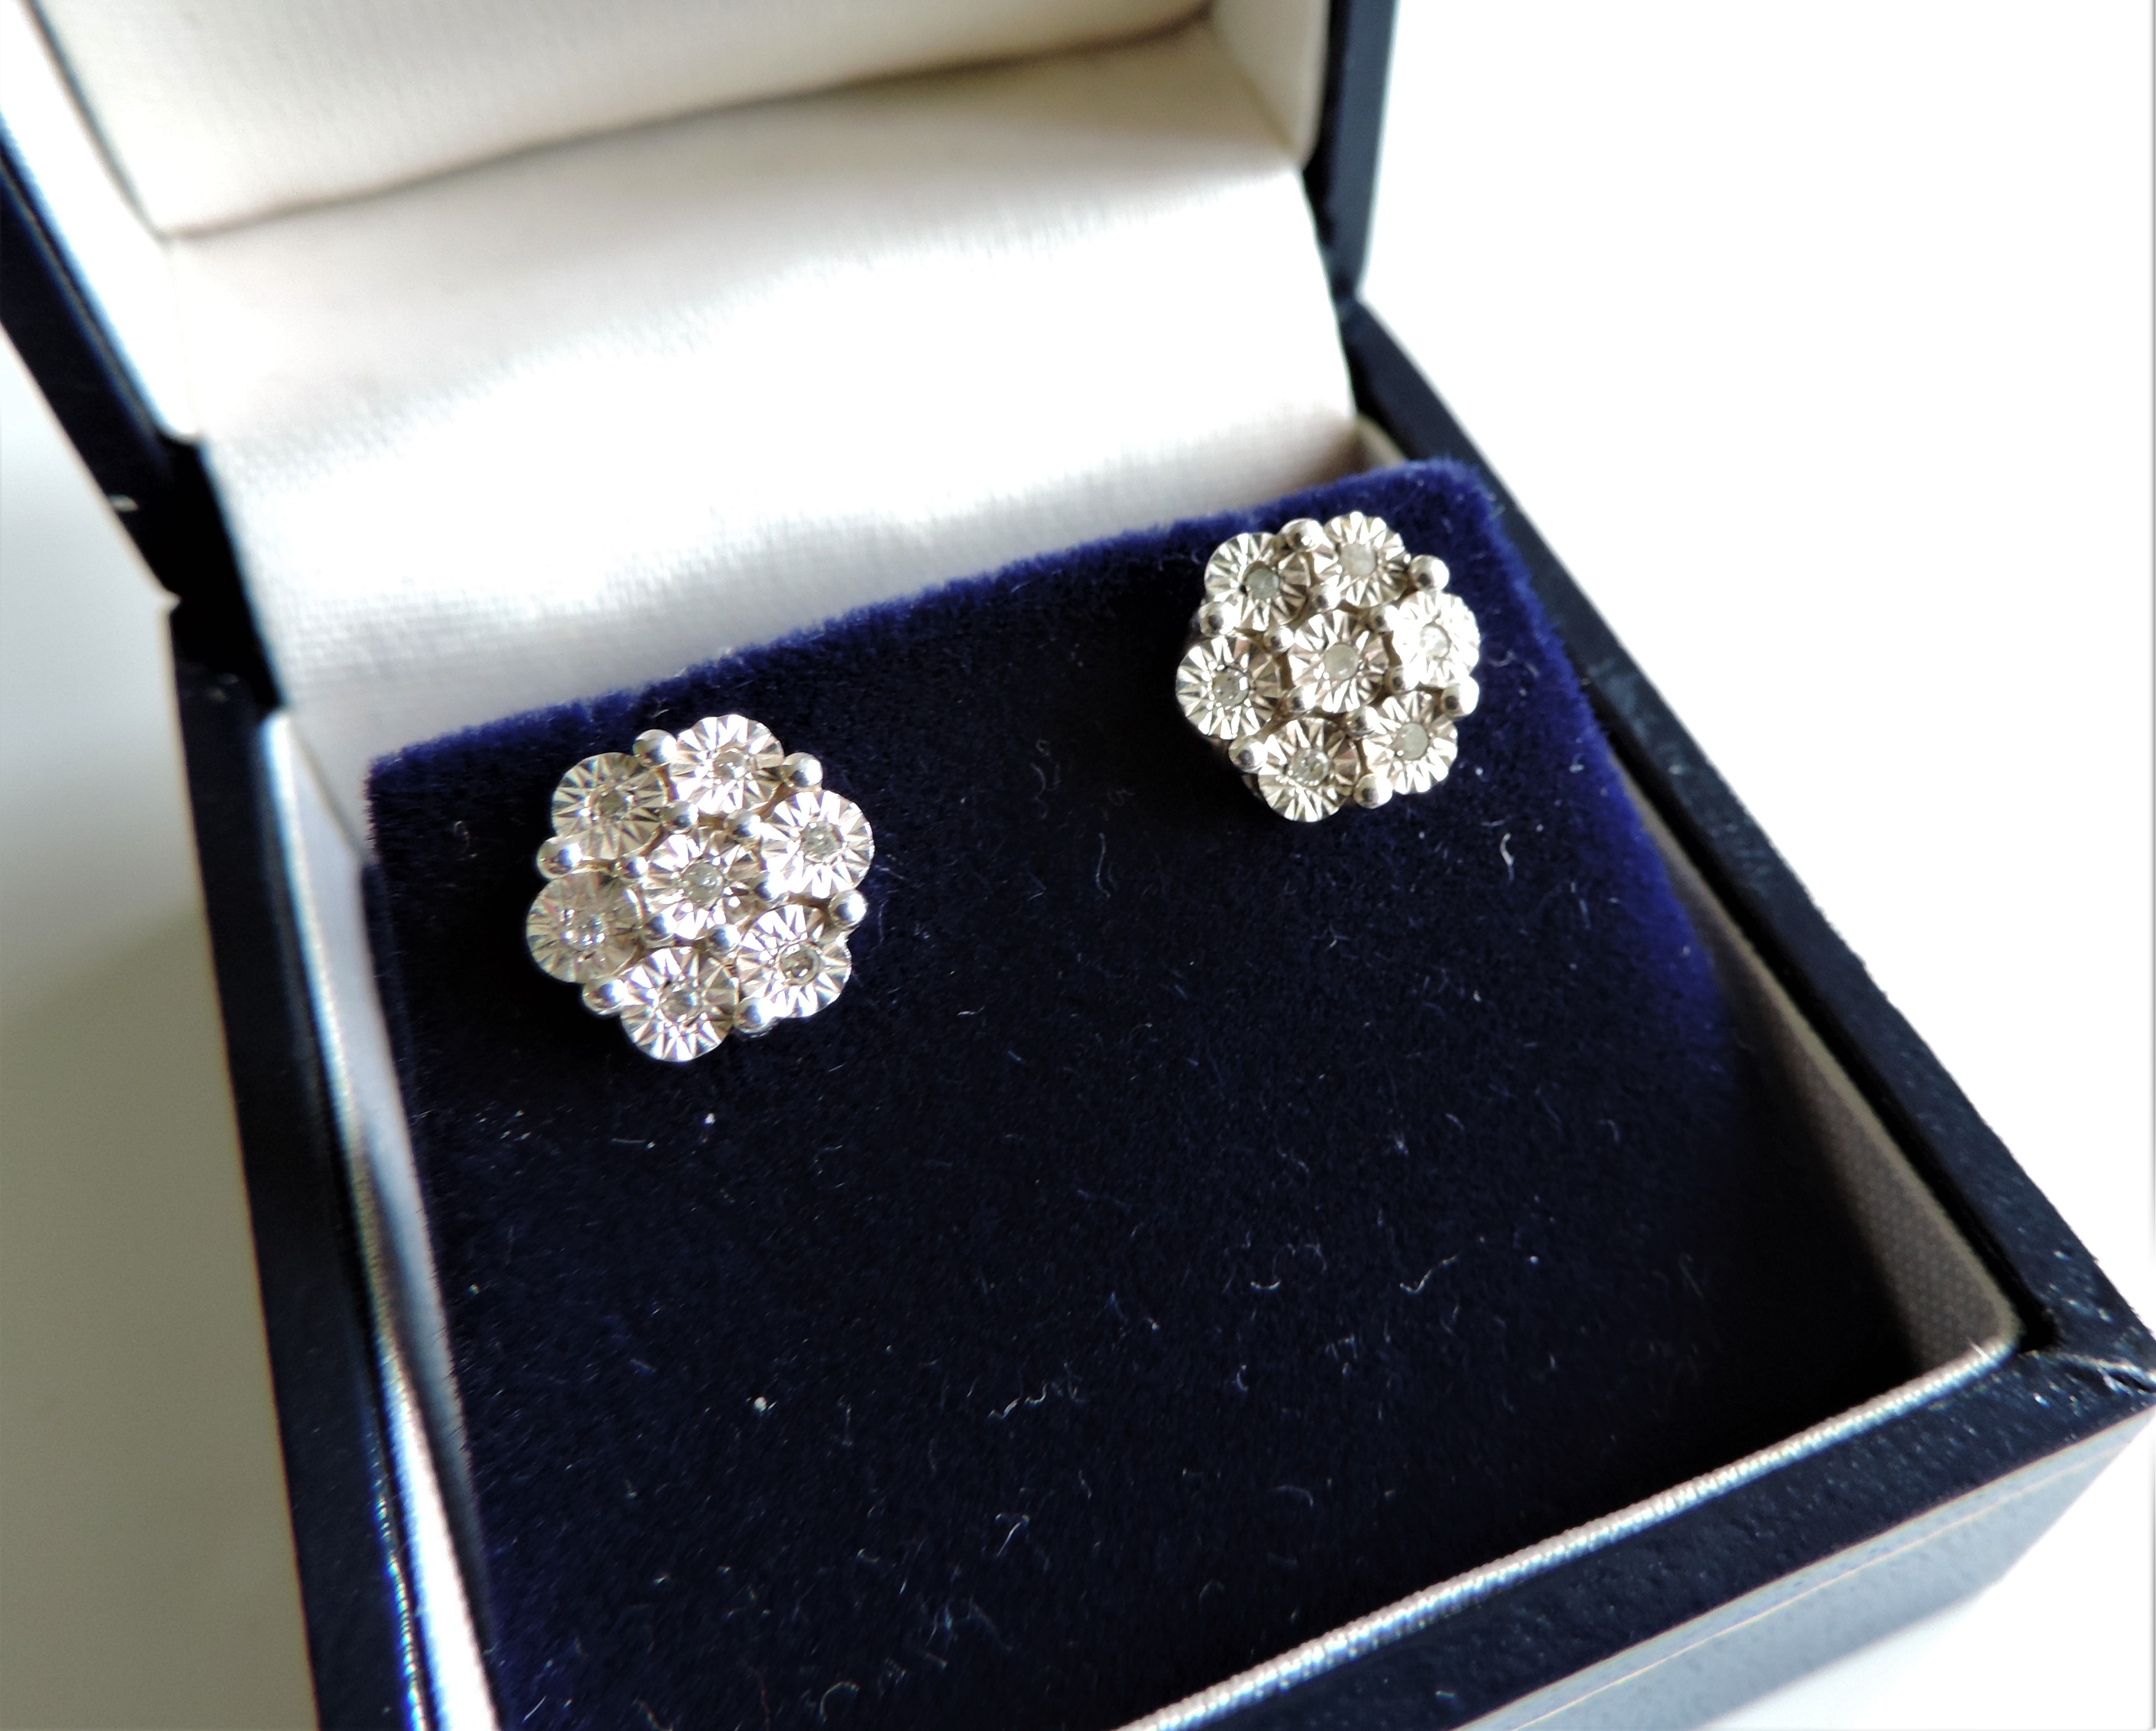 Sterling Silver Diamond Earrings New with Gift Box - Image 3 of 5